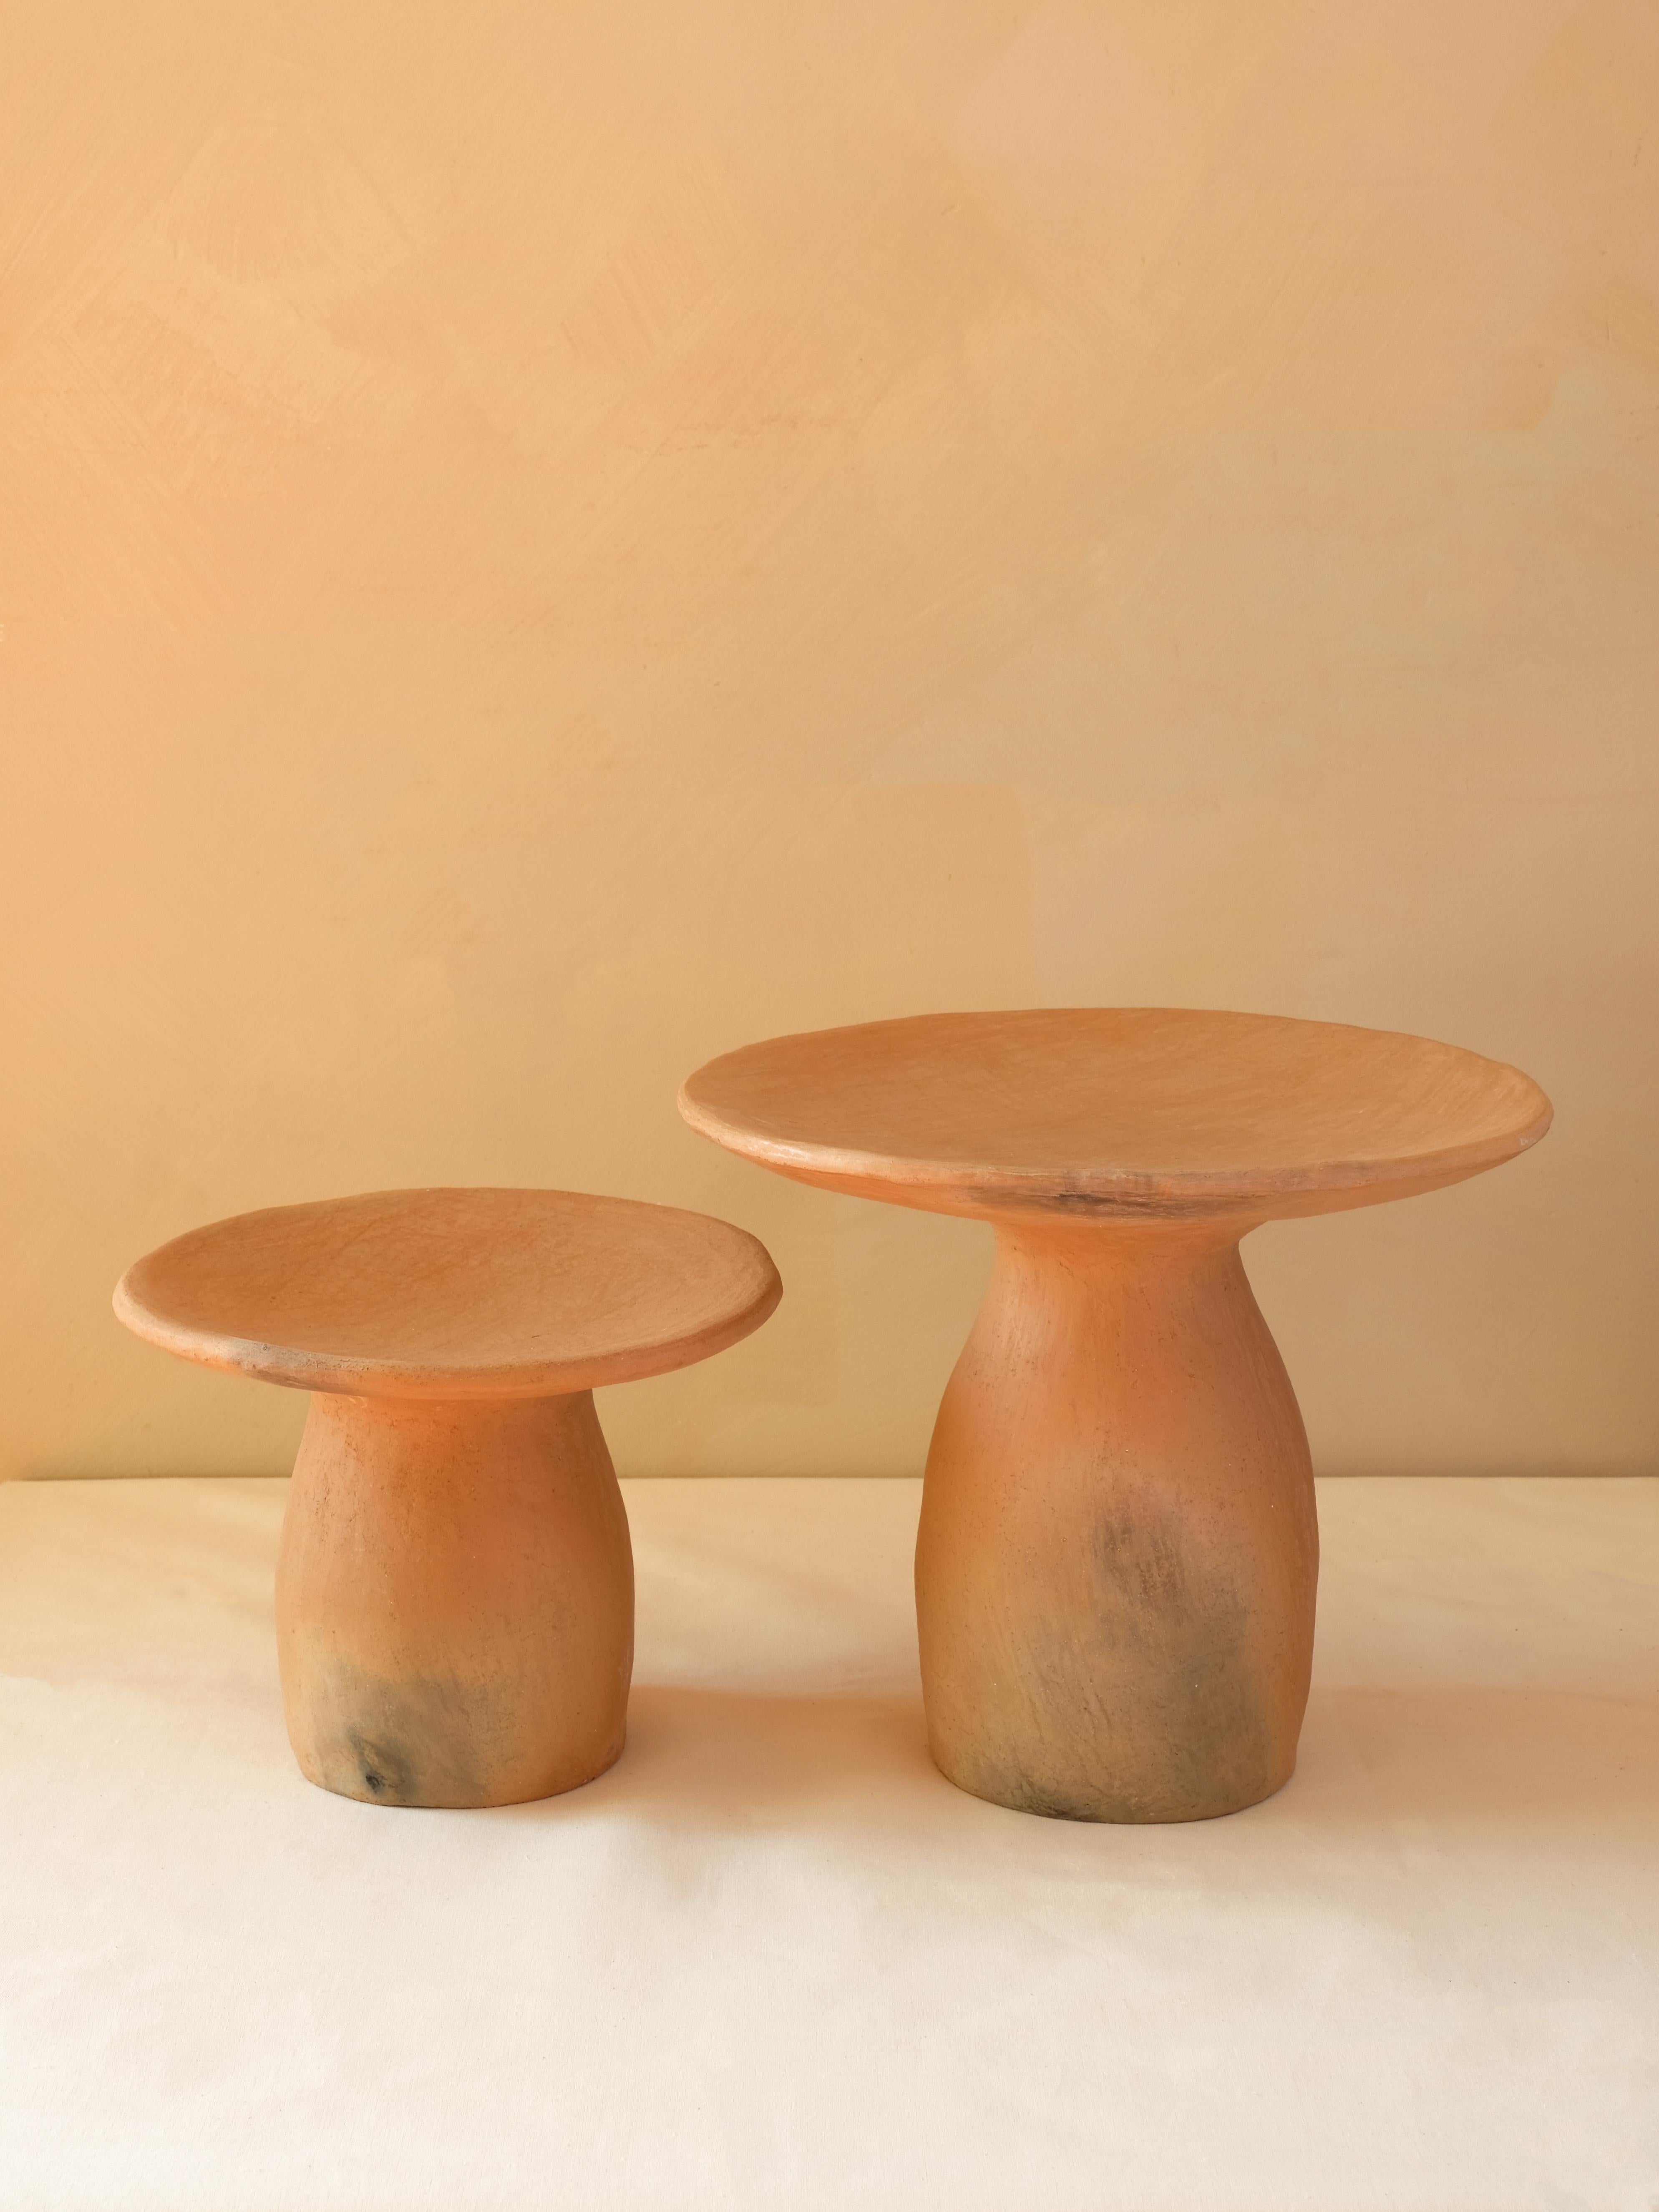 Terracotta contemporary Side Table Made of Clay, Handcrafted by the Potter Houda For Sale 1